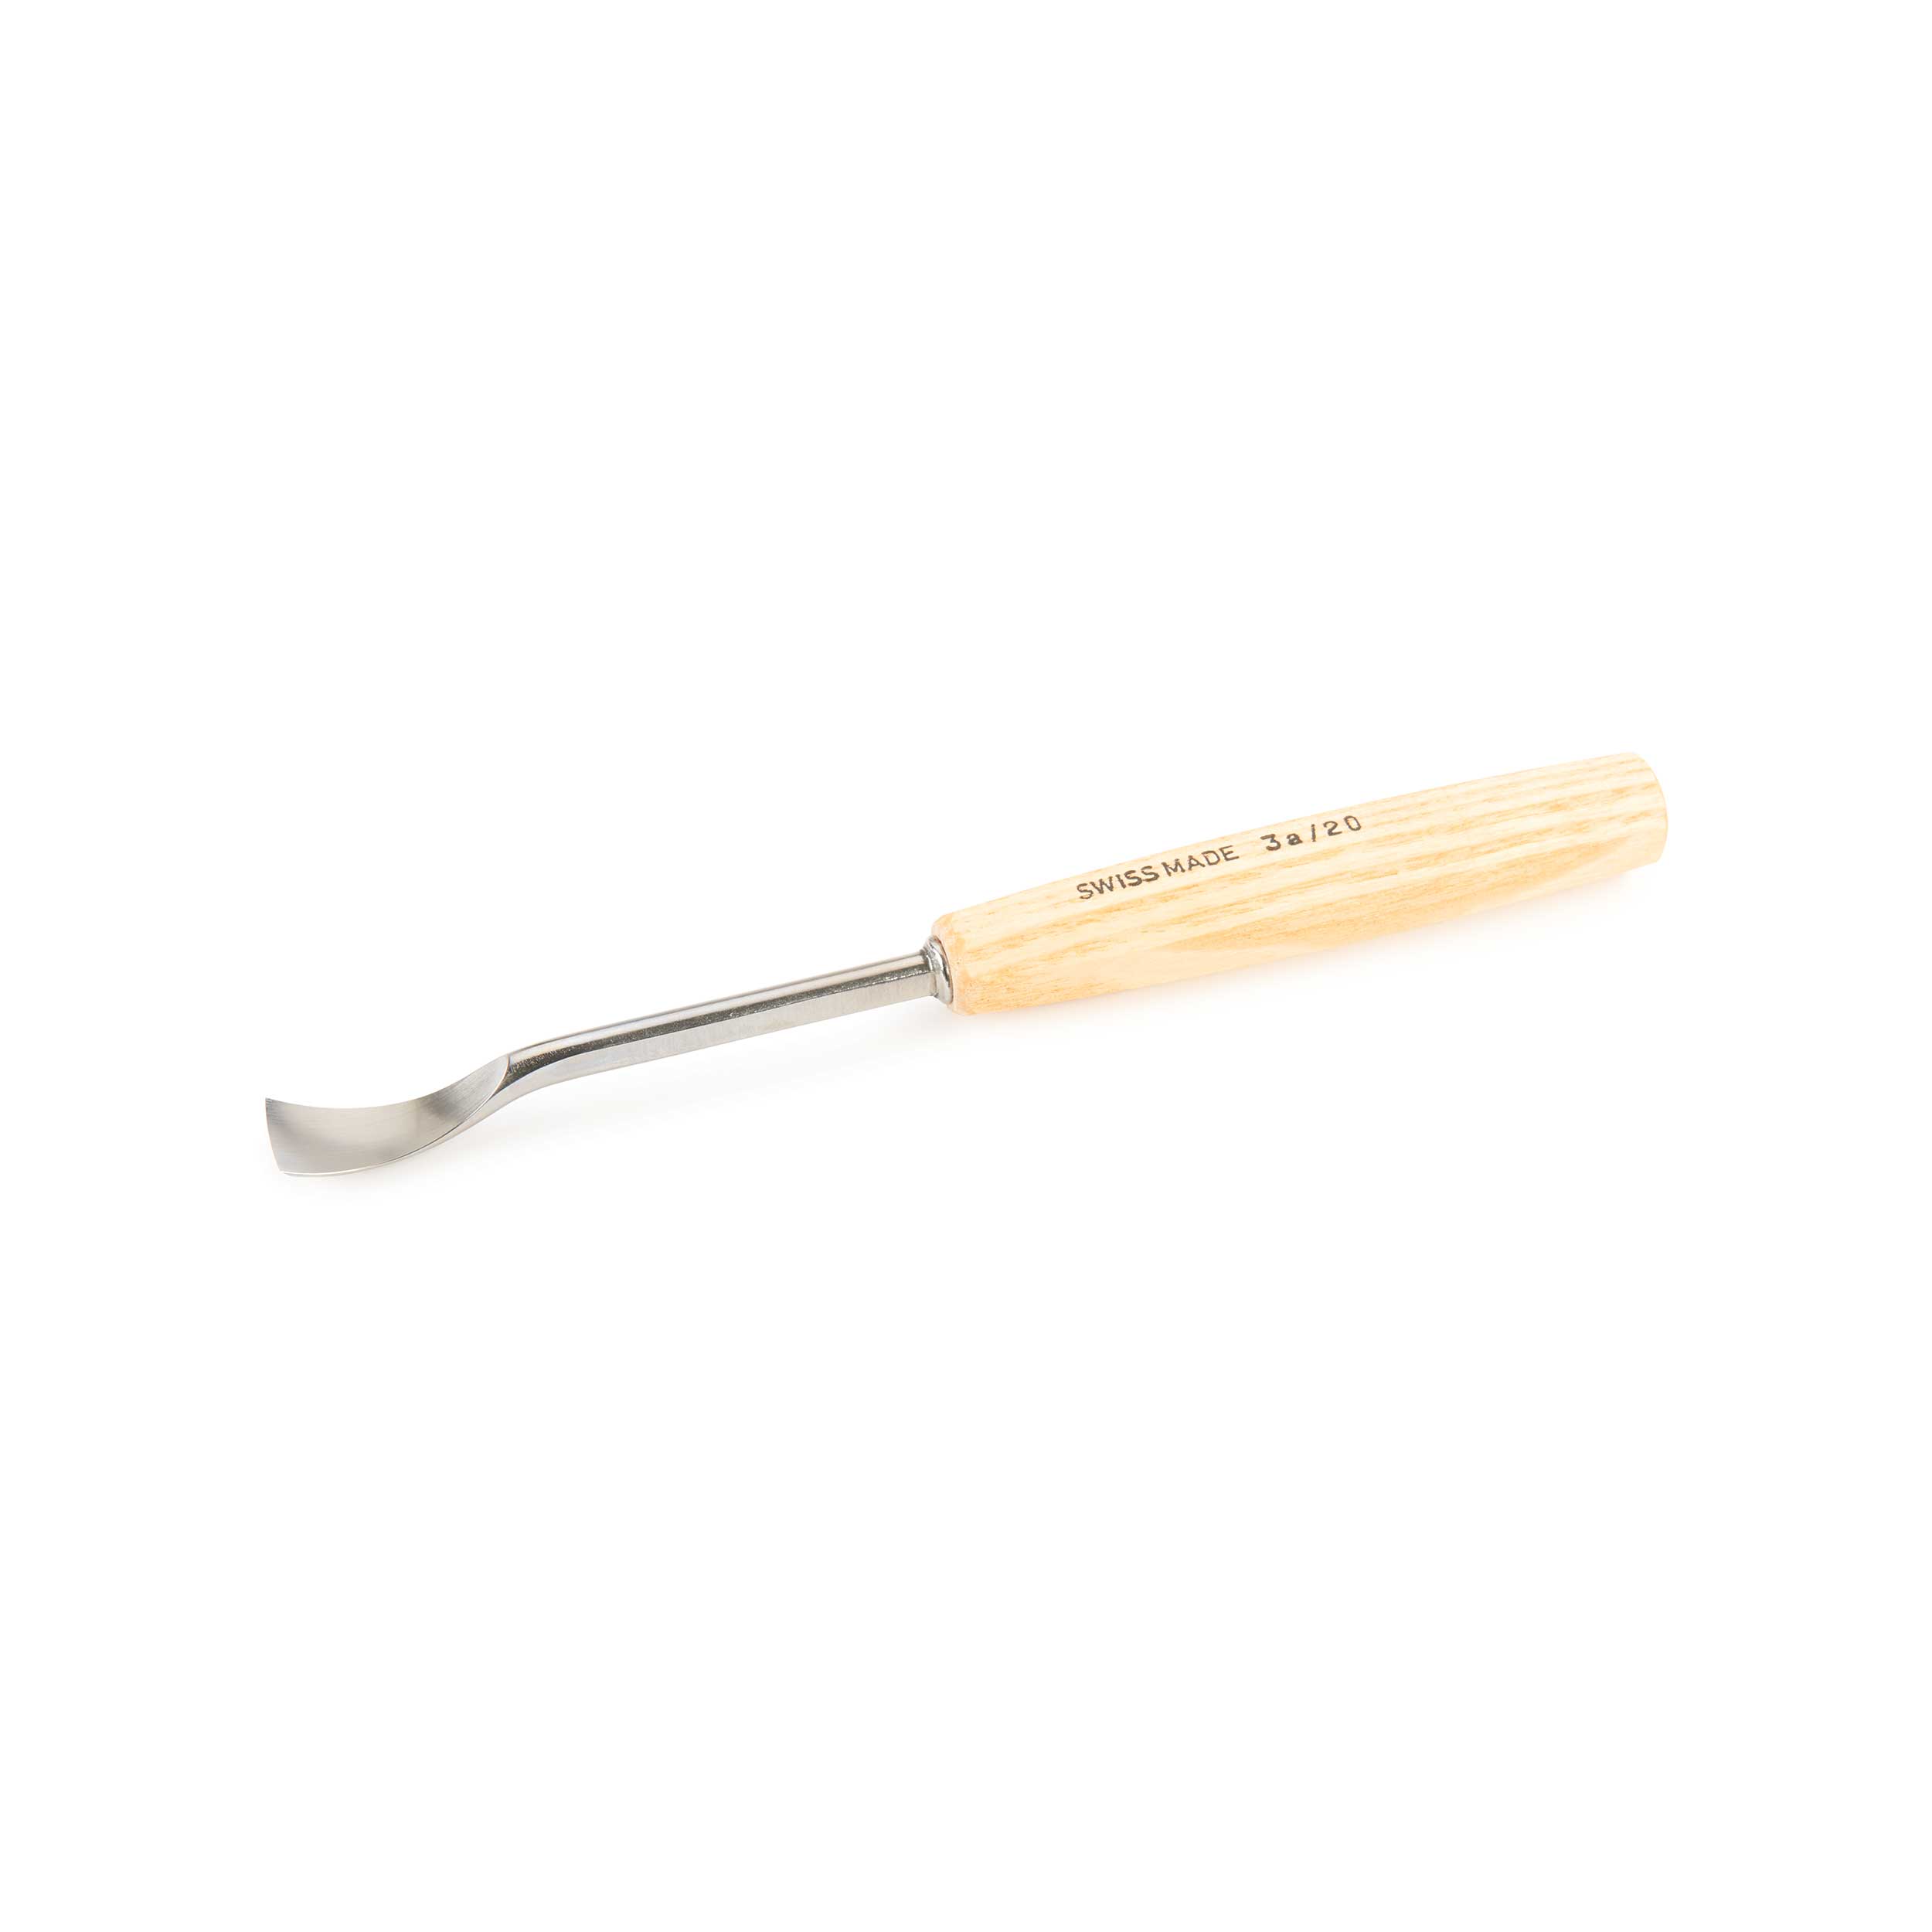 #3 Sweep Spoon Gouge 20 Mm, Full Size